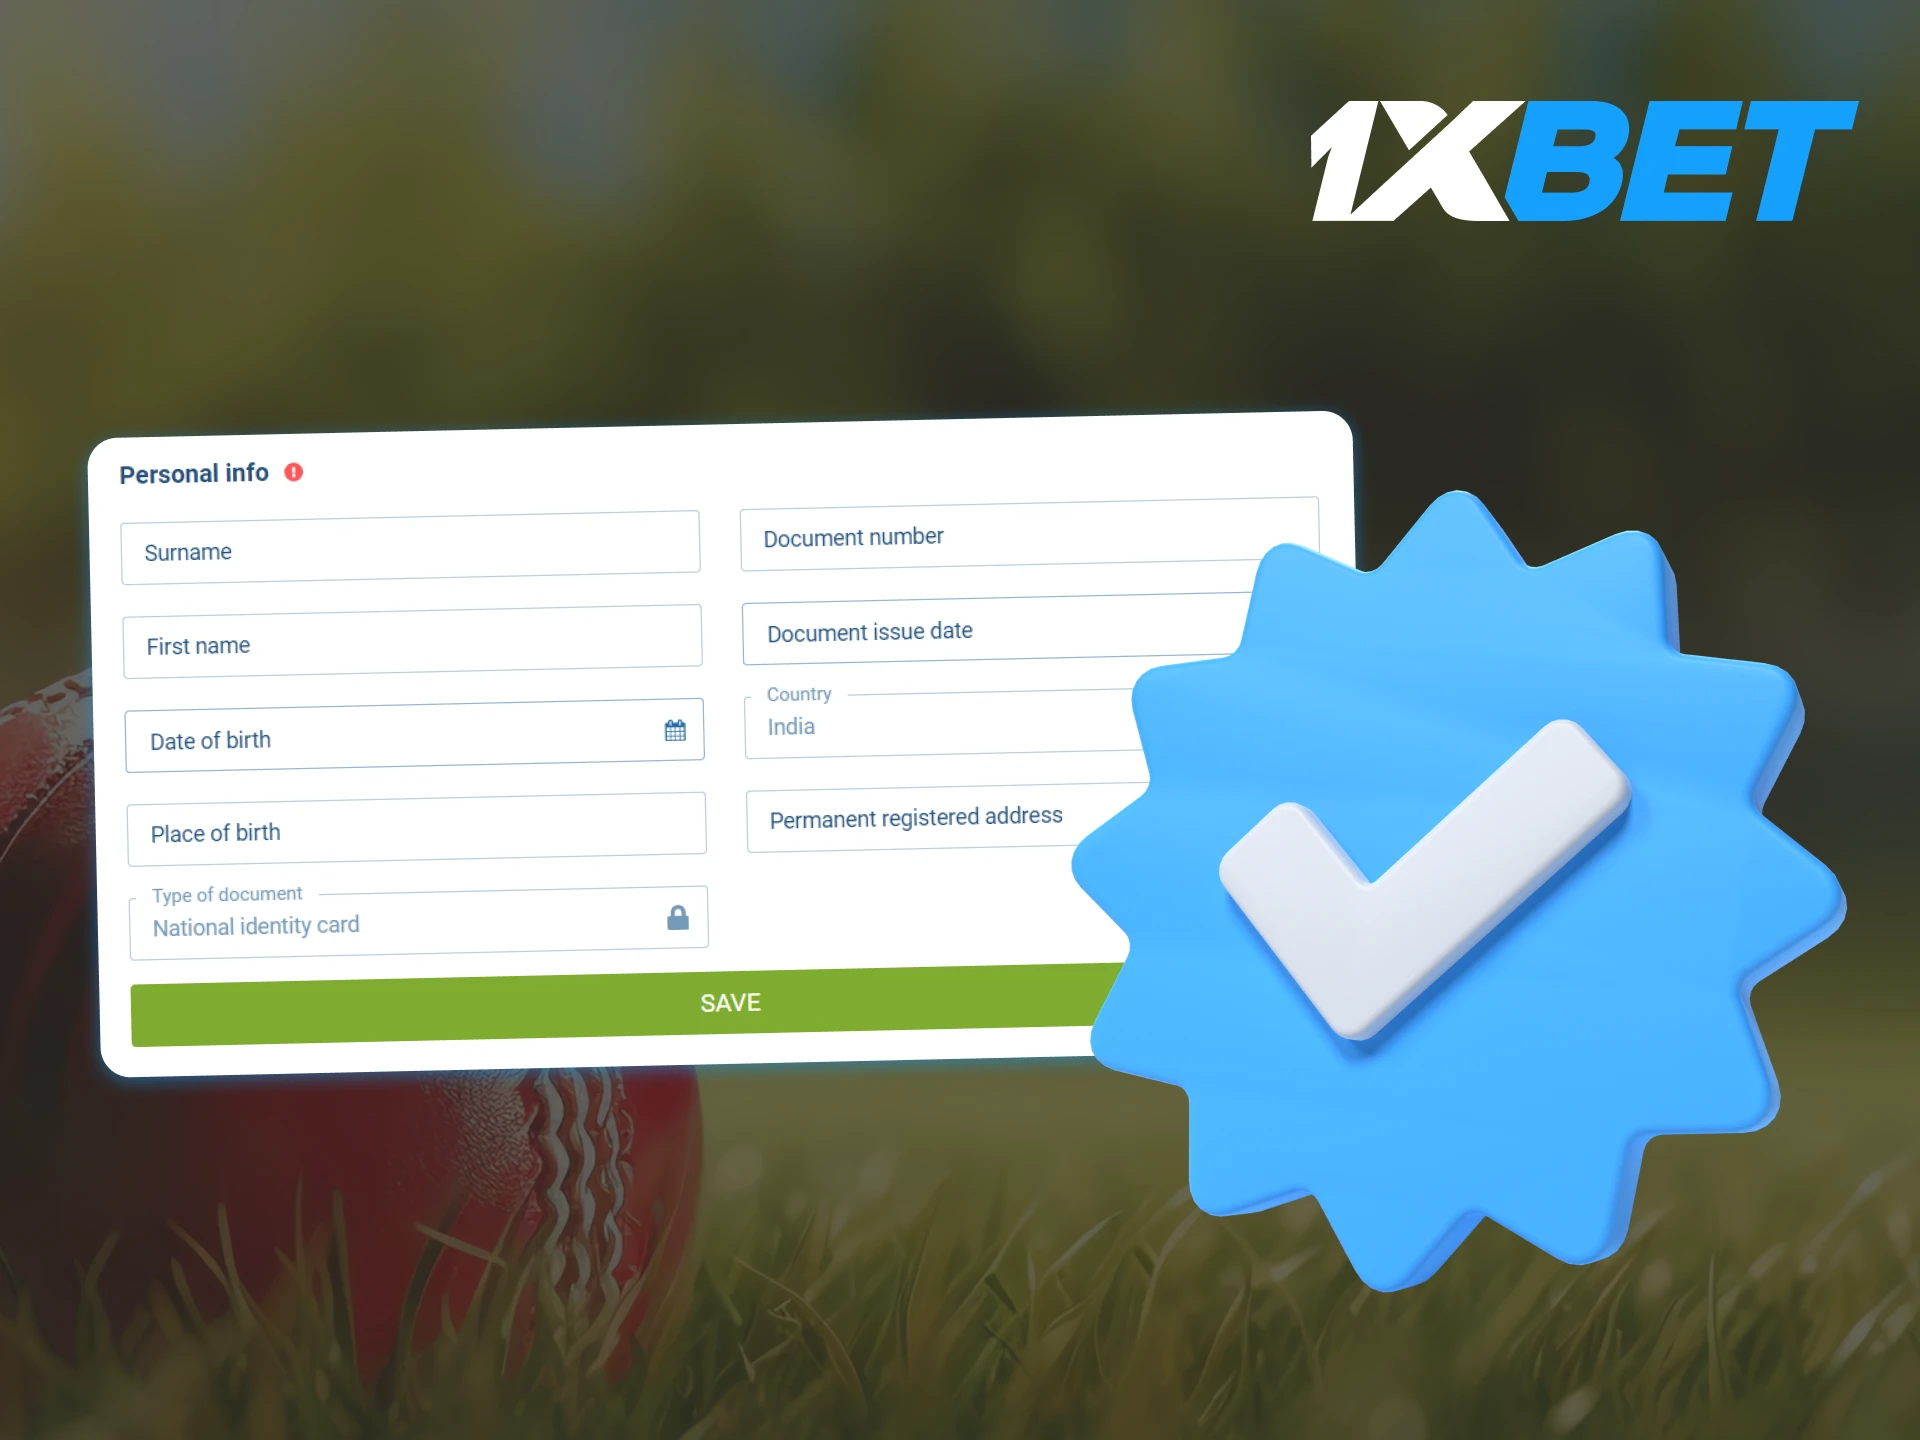 Fill in your personal information in your account settings to verify your 1xBet account.